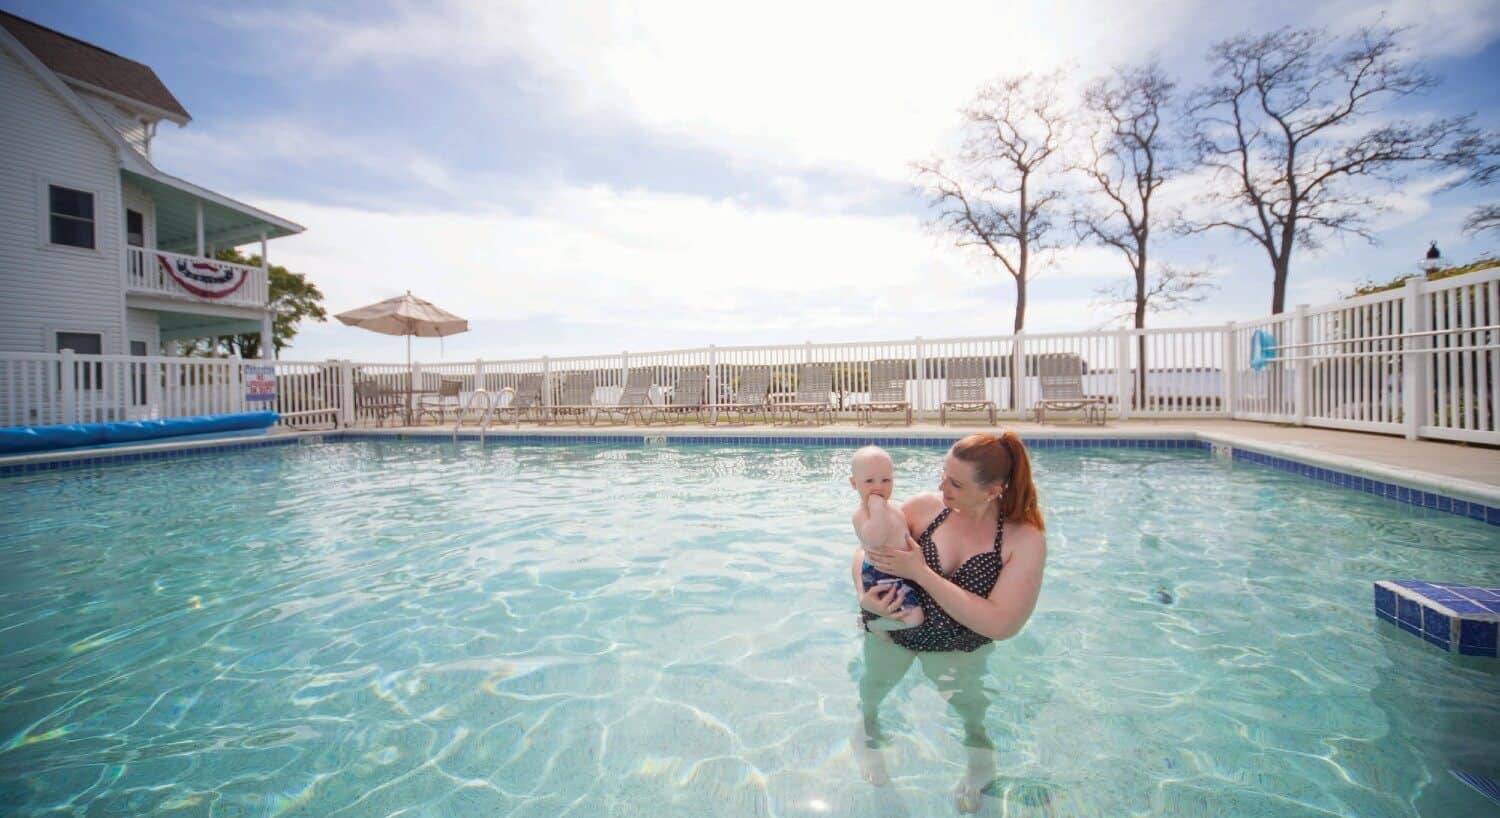 A woman bolding a baby in a large outdoor pool next to a hotel building and overlooking the water